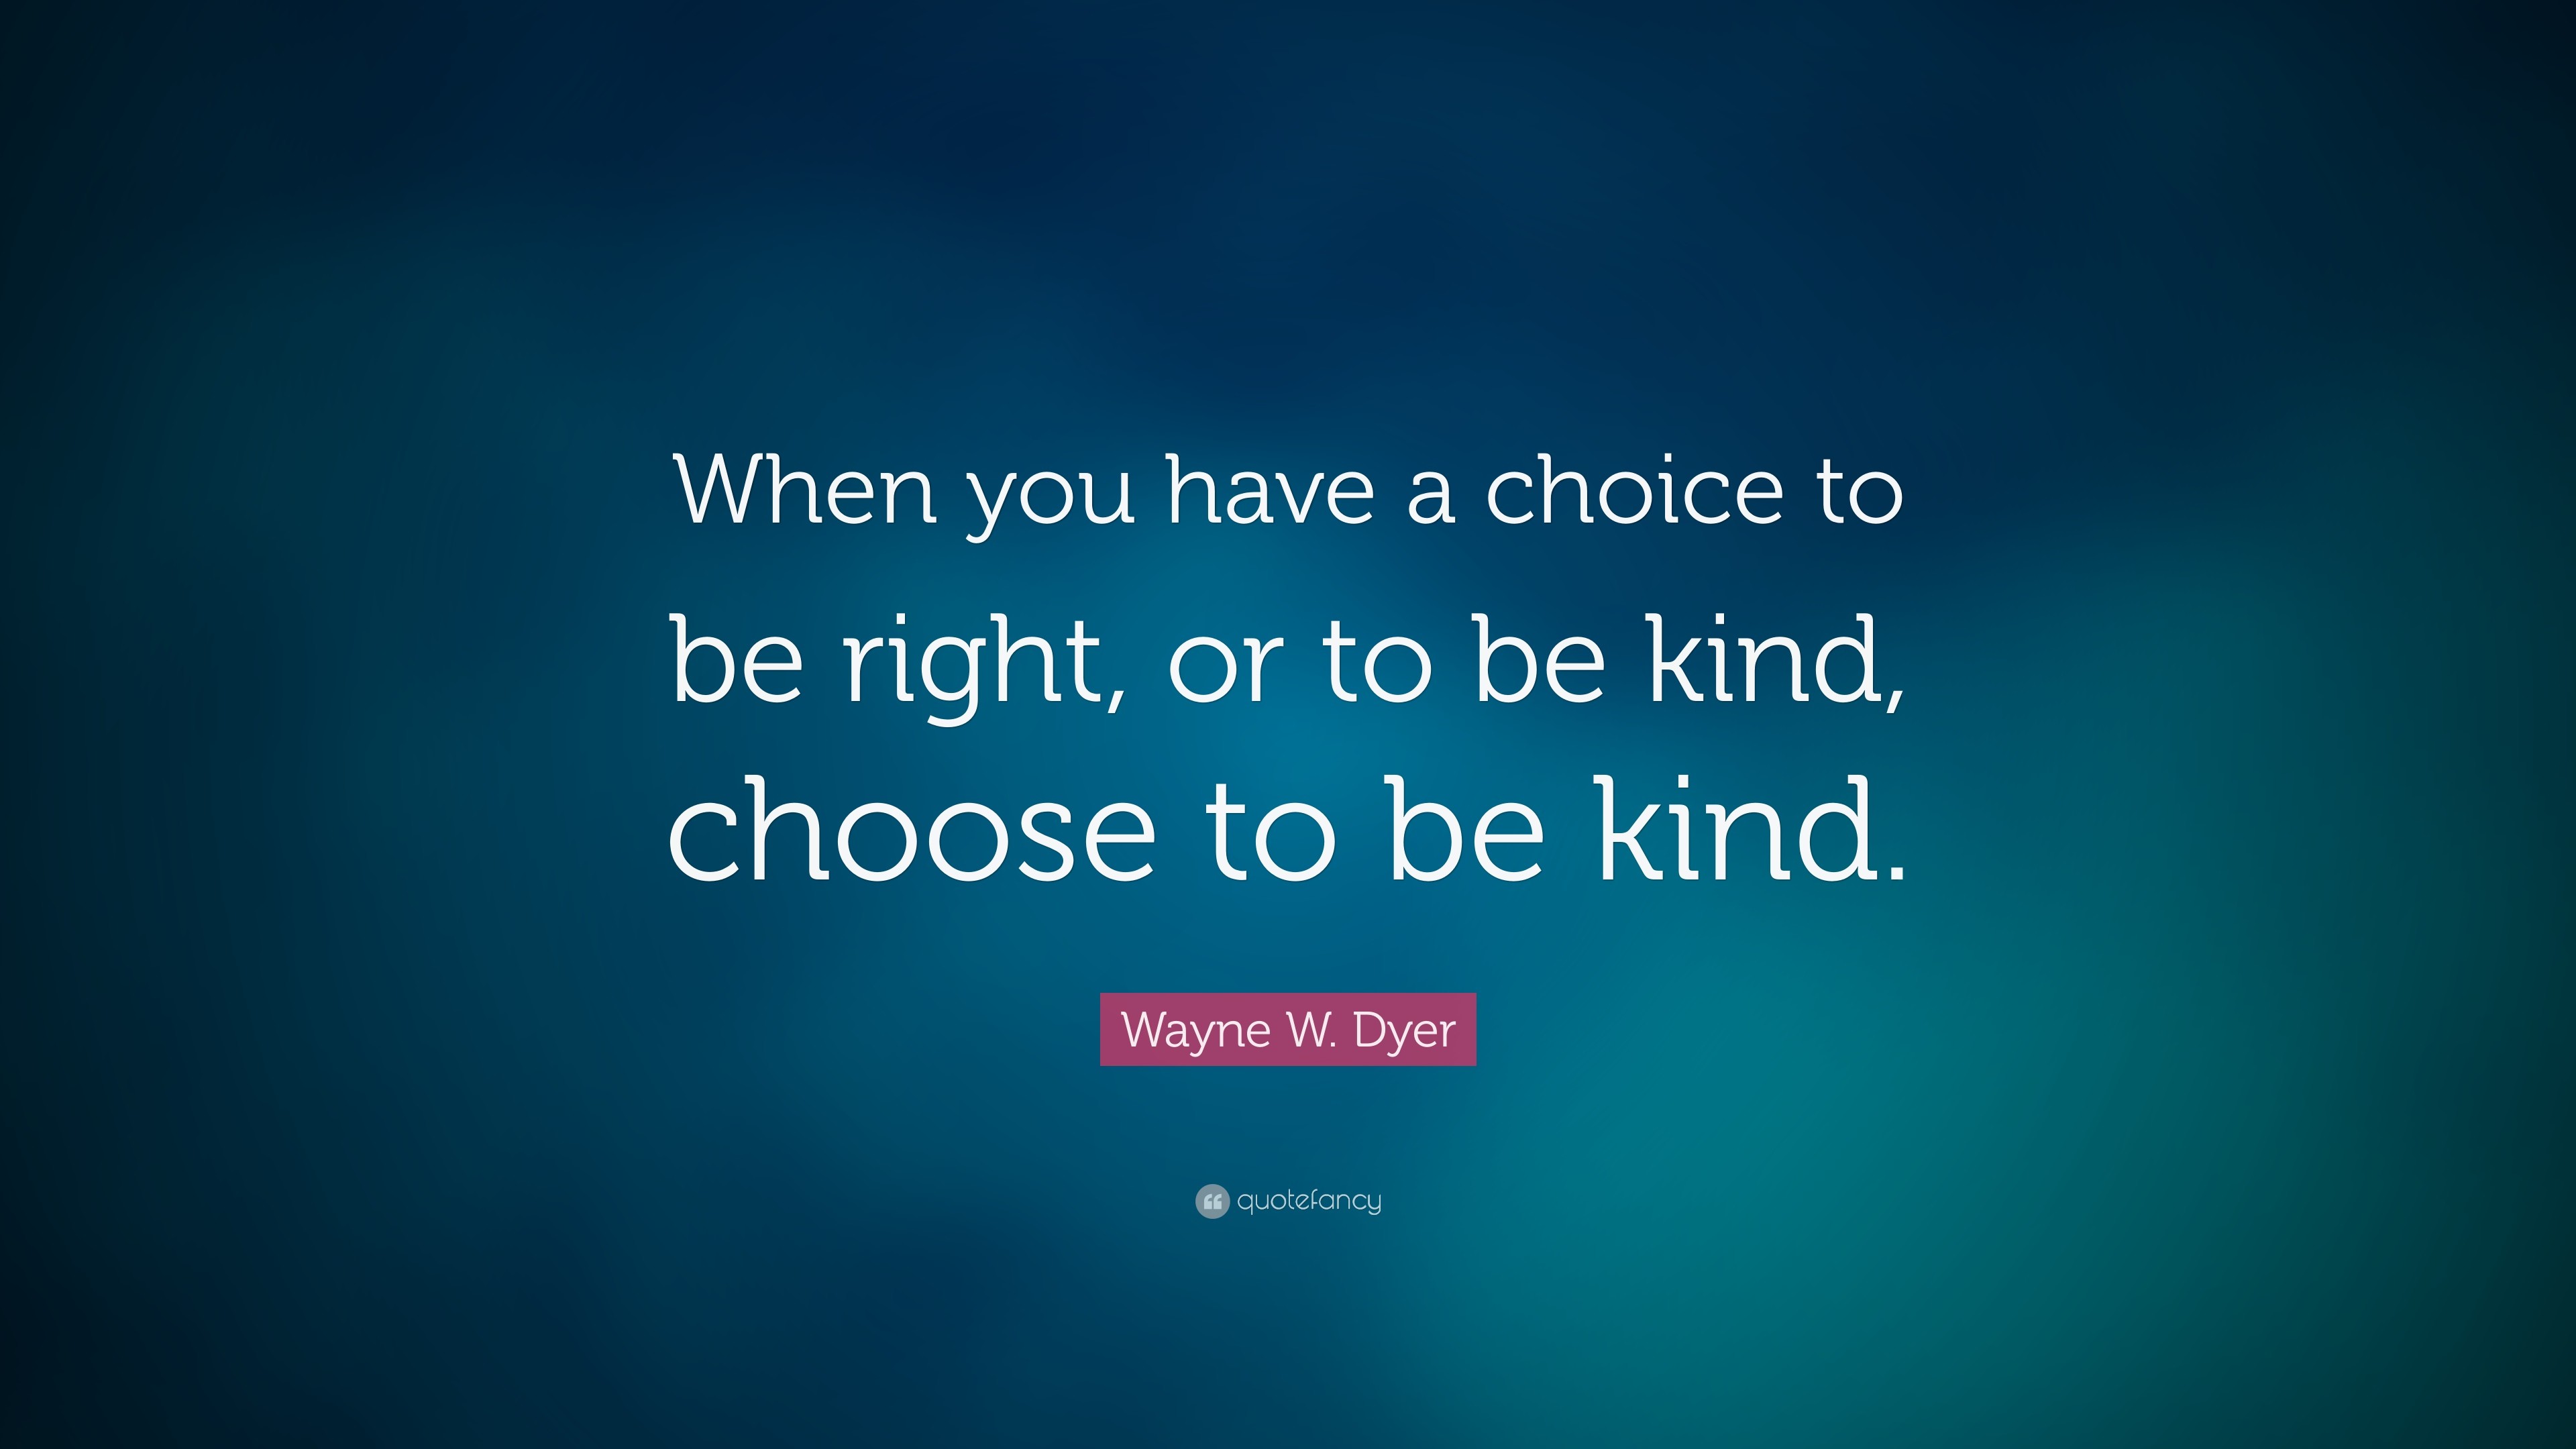 3840x2160 Wayne W. Dyer Quote: “When you have a choice to be right,